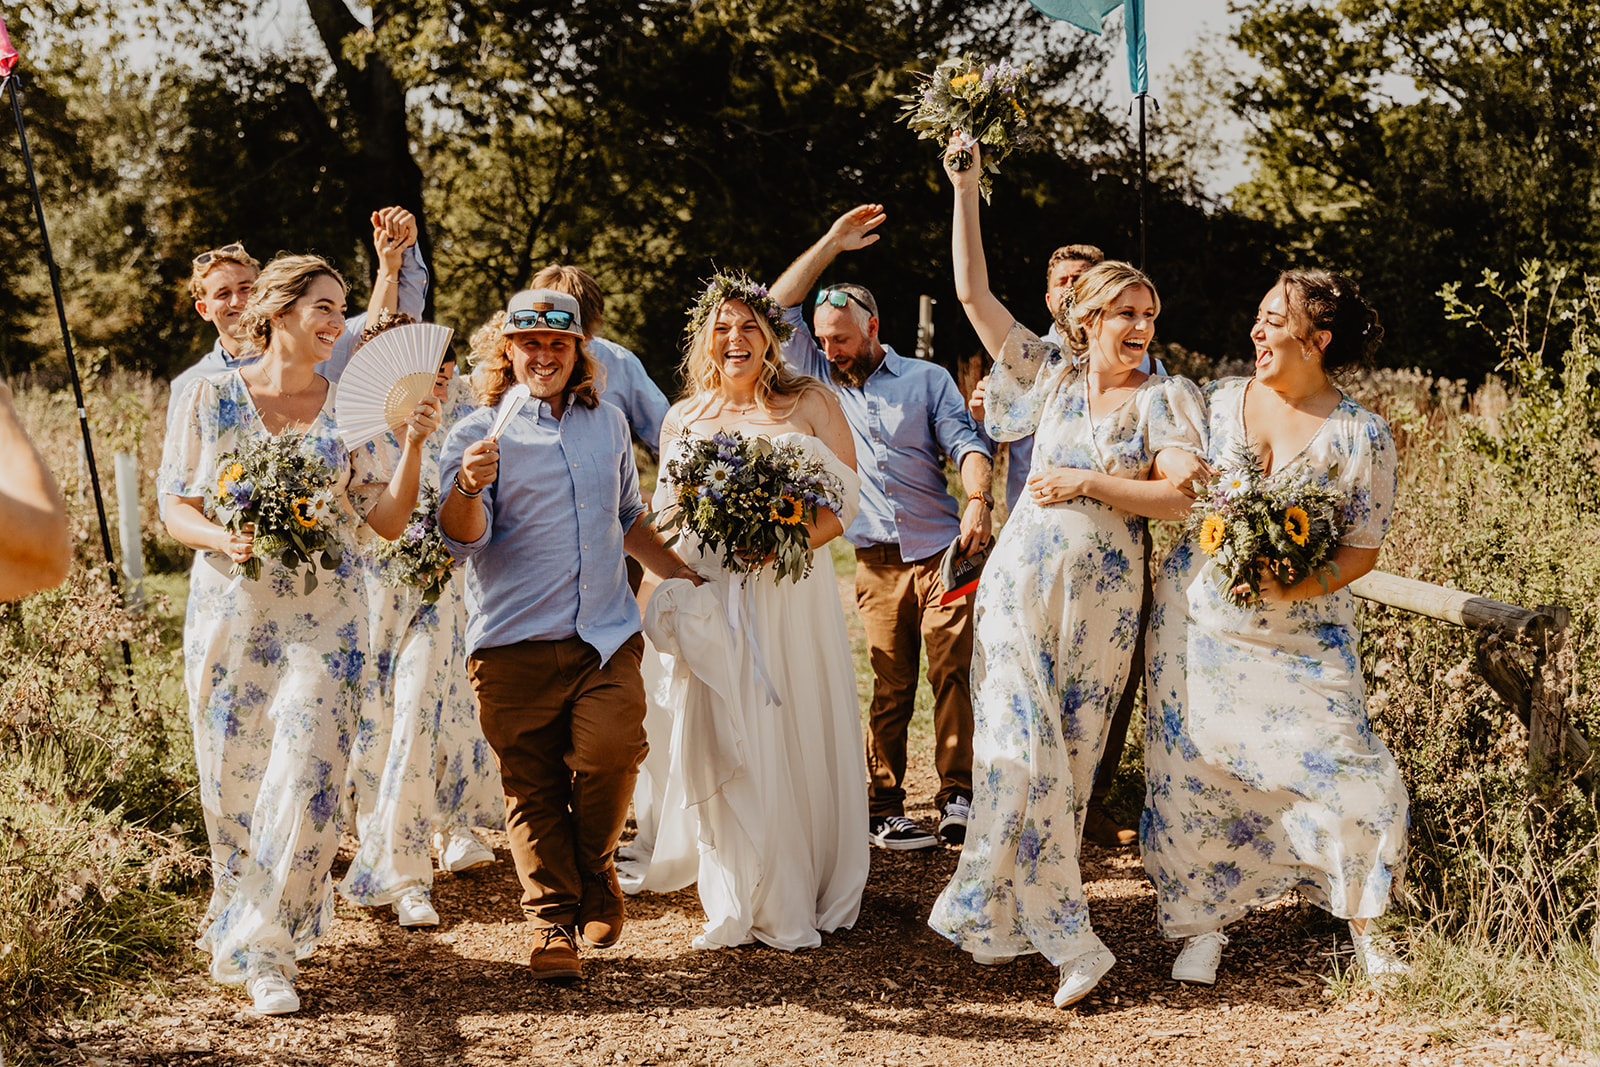 Wedding party photos at a wedding at Mac's Farm in Sussex. By OliveJoy Photography.